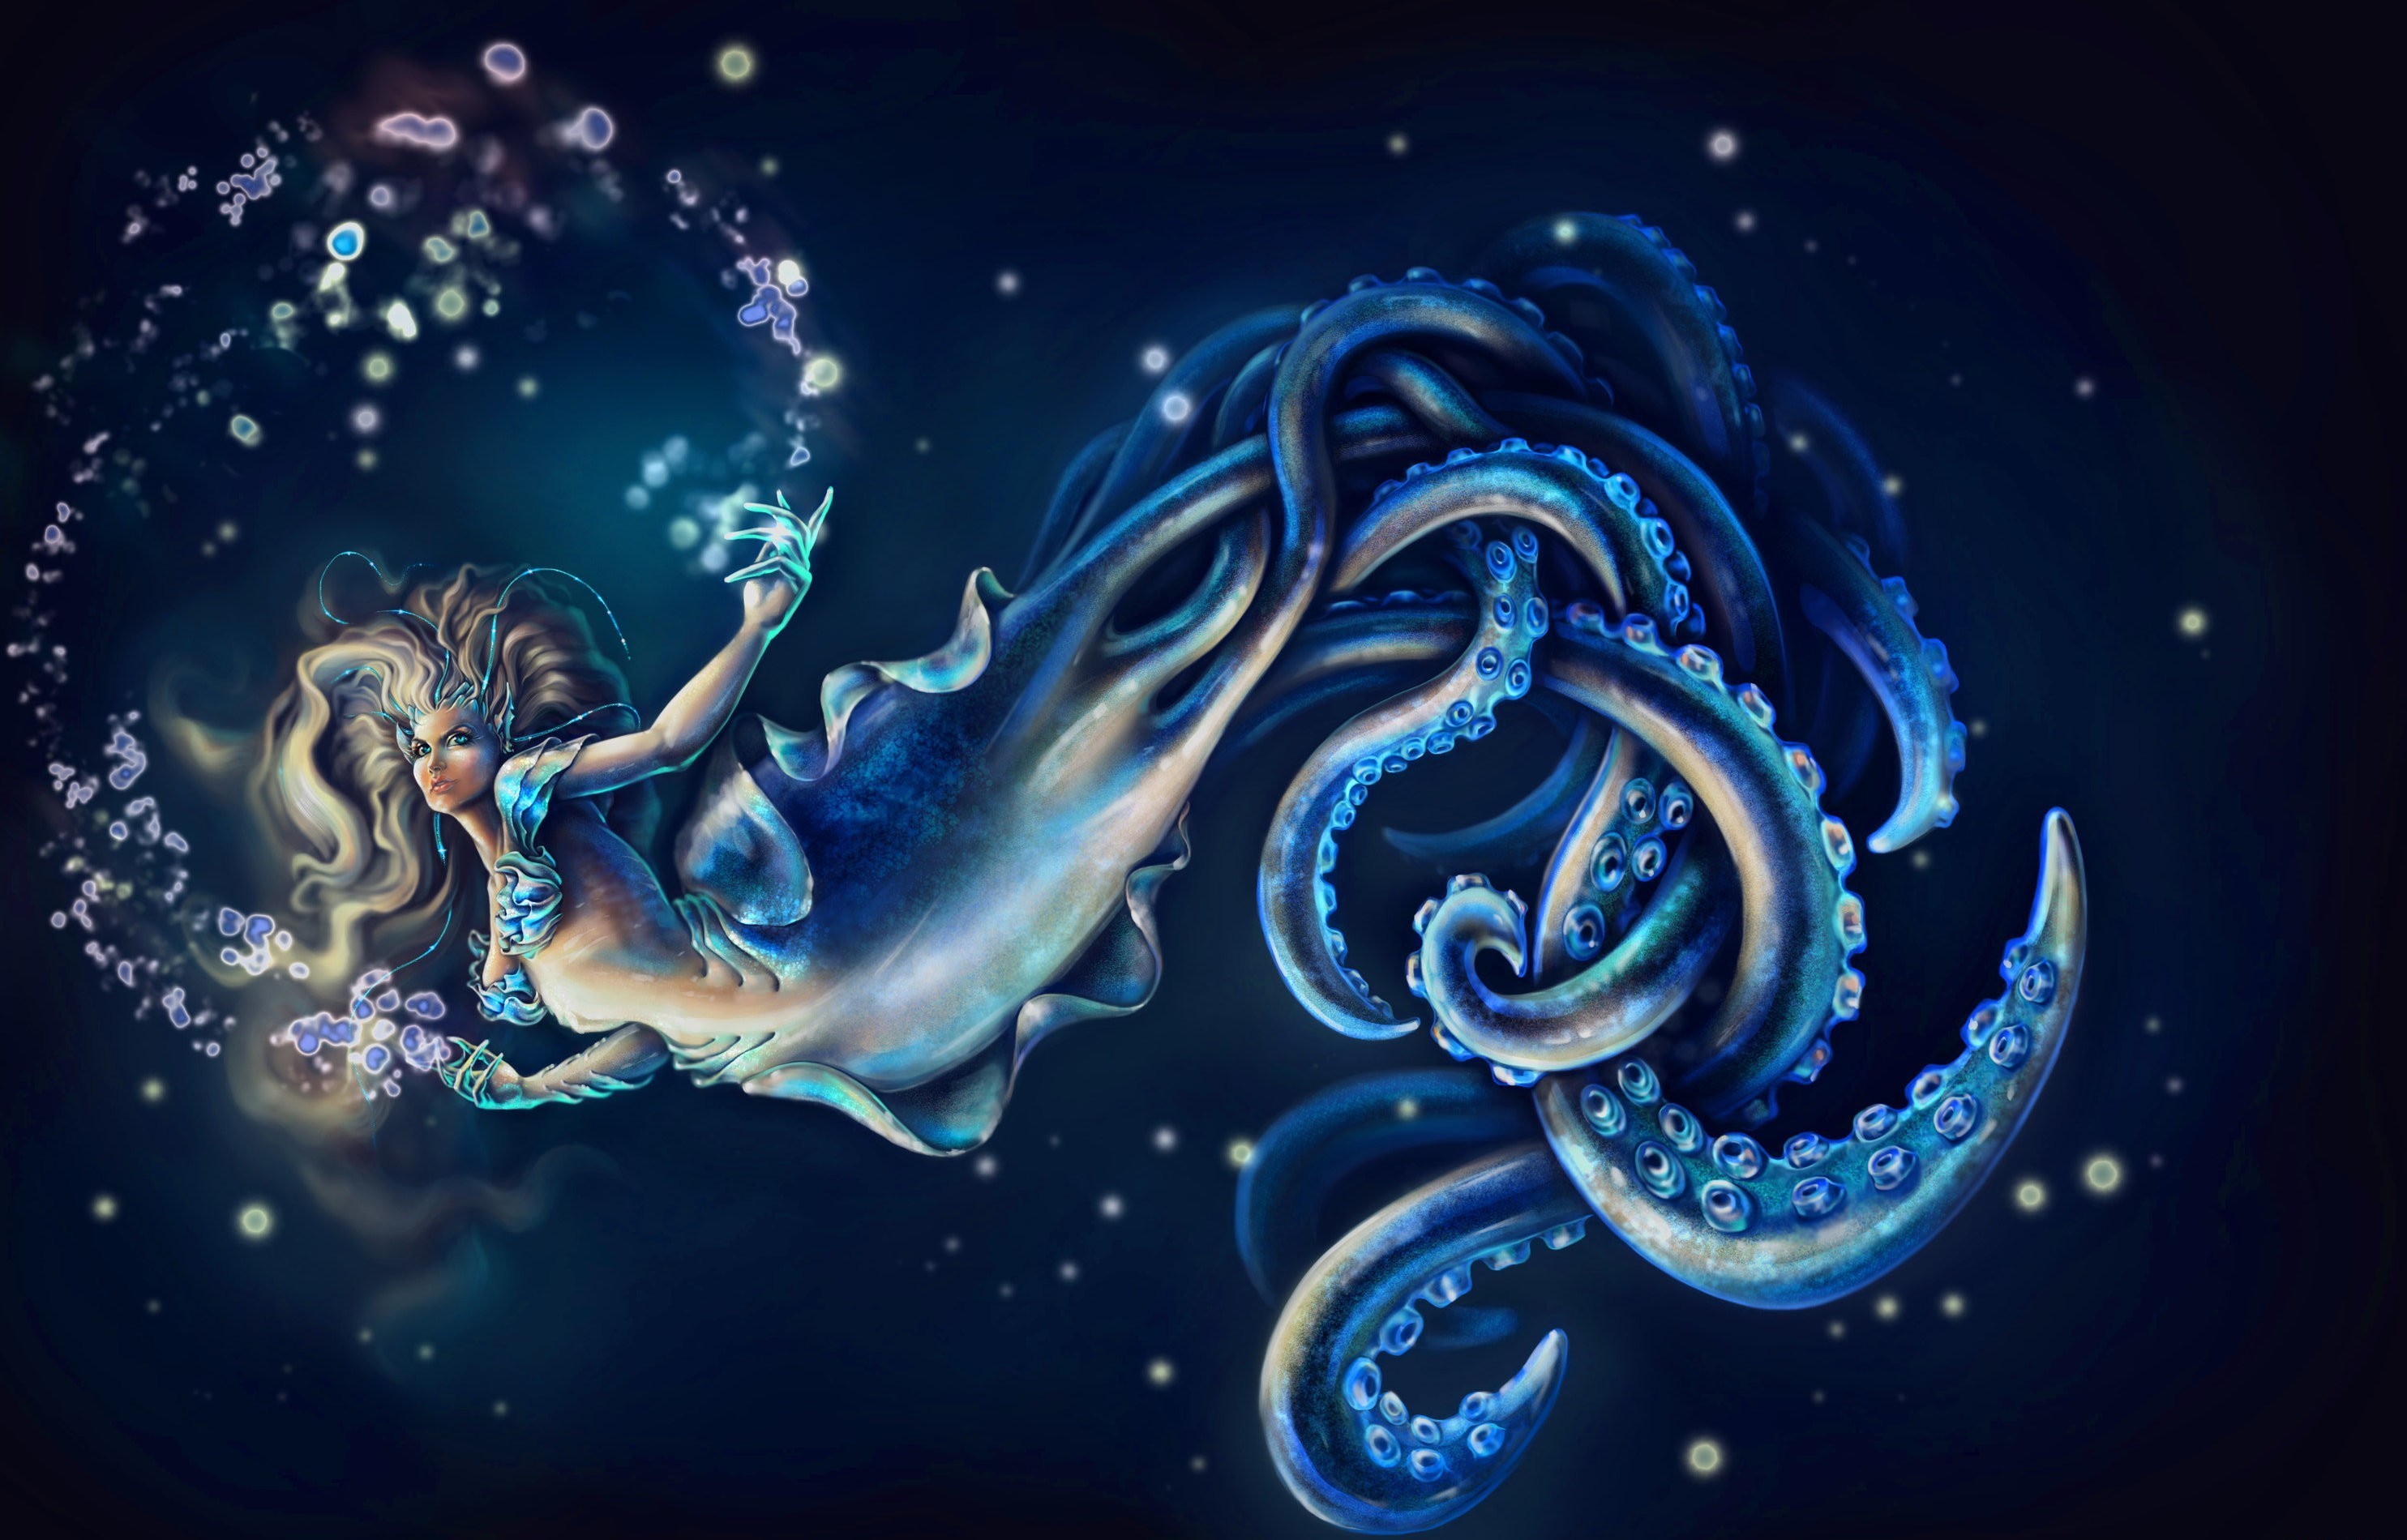 Tentacle HD Wallpaper Background Image